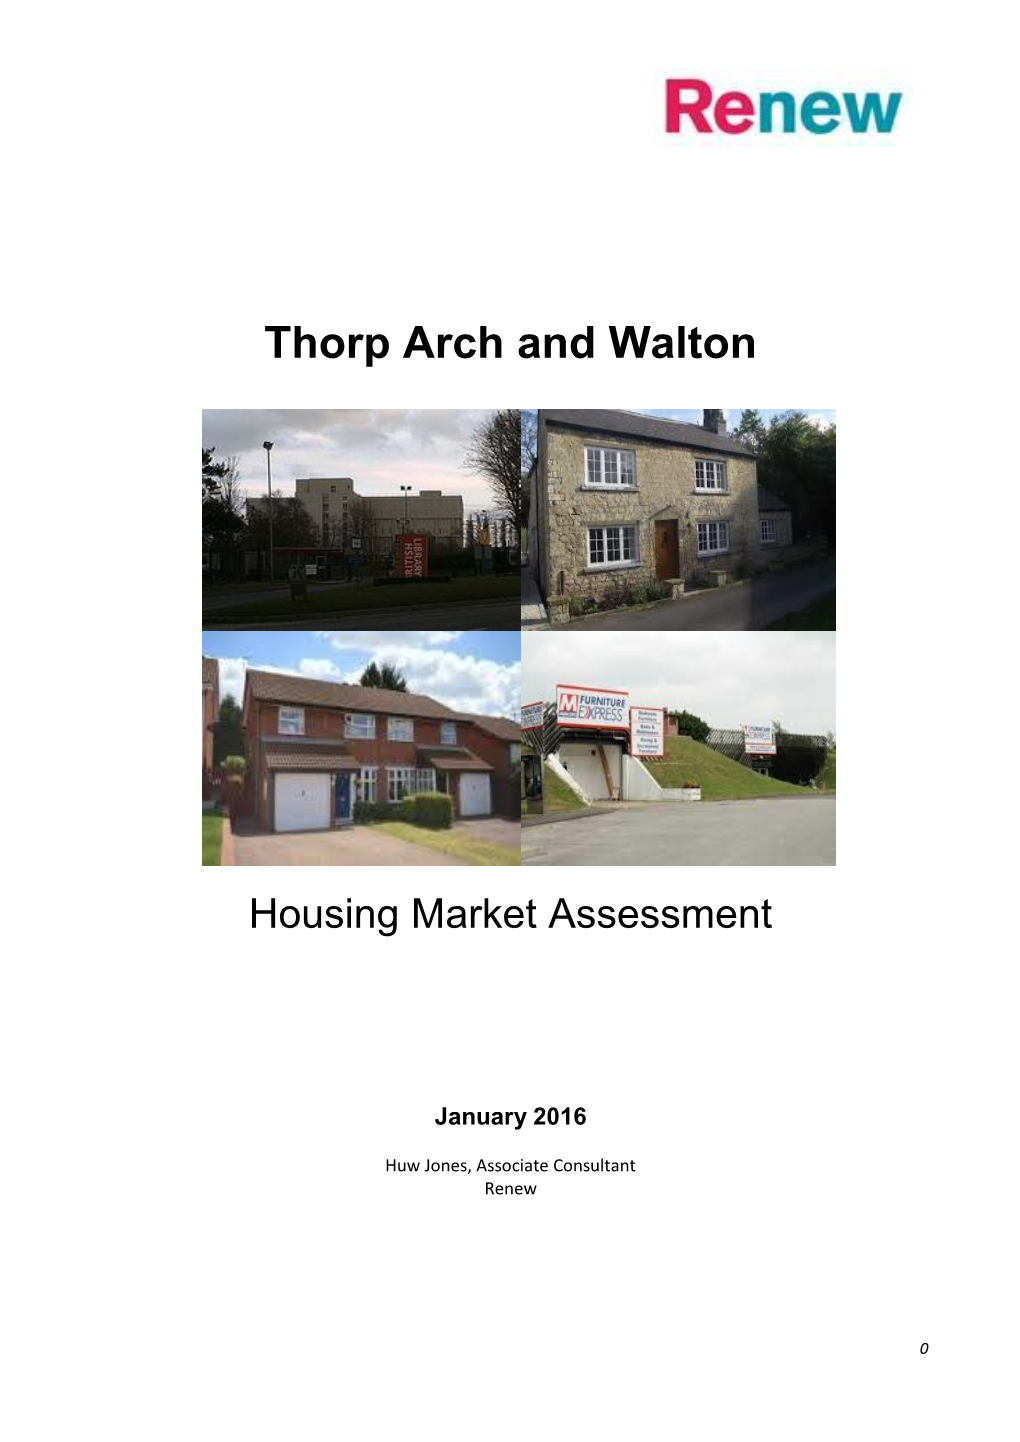 Thorp Arch and Walton